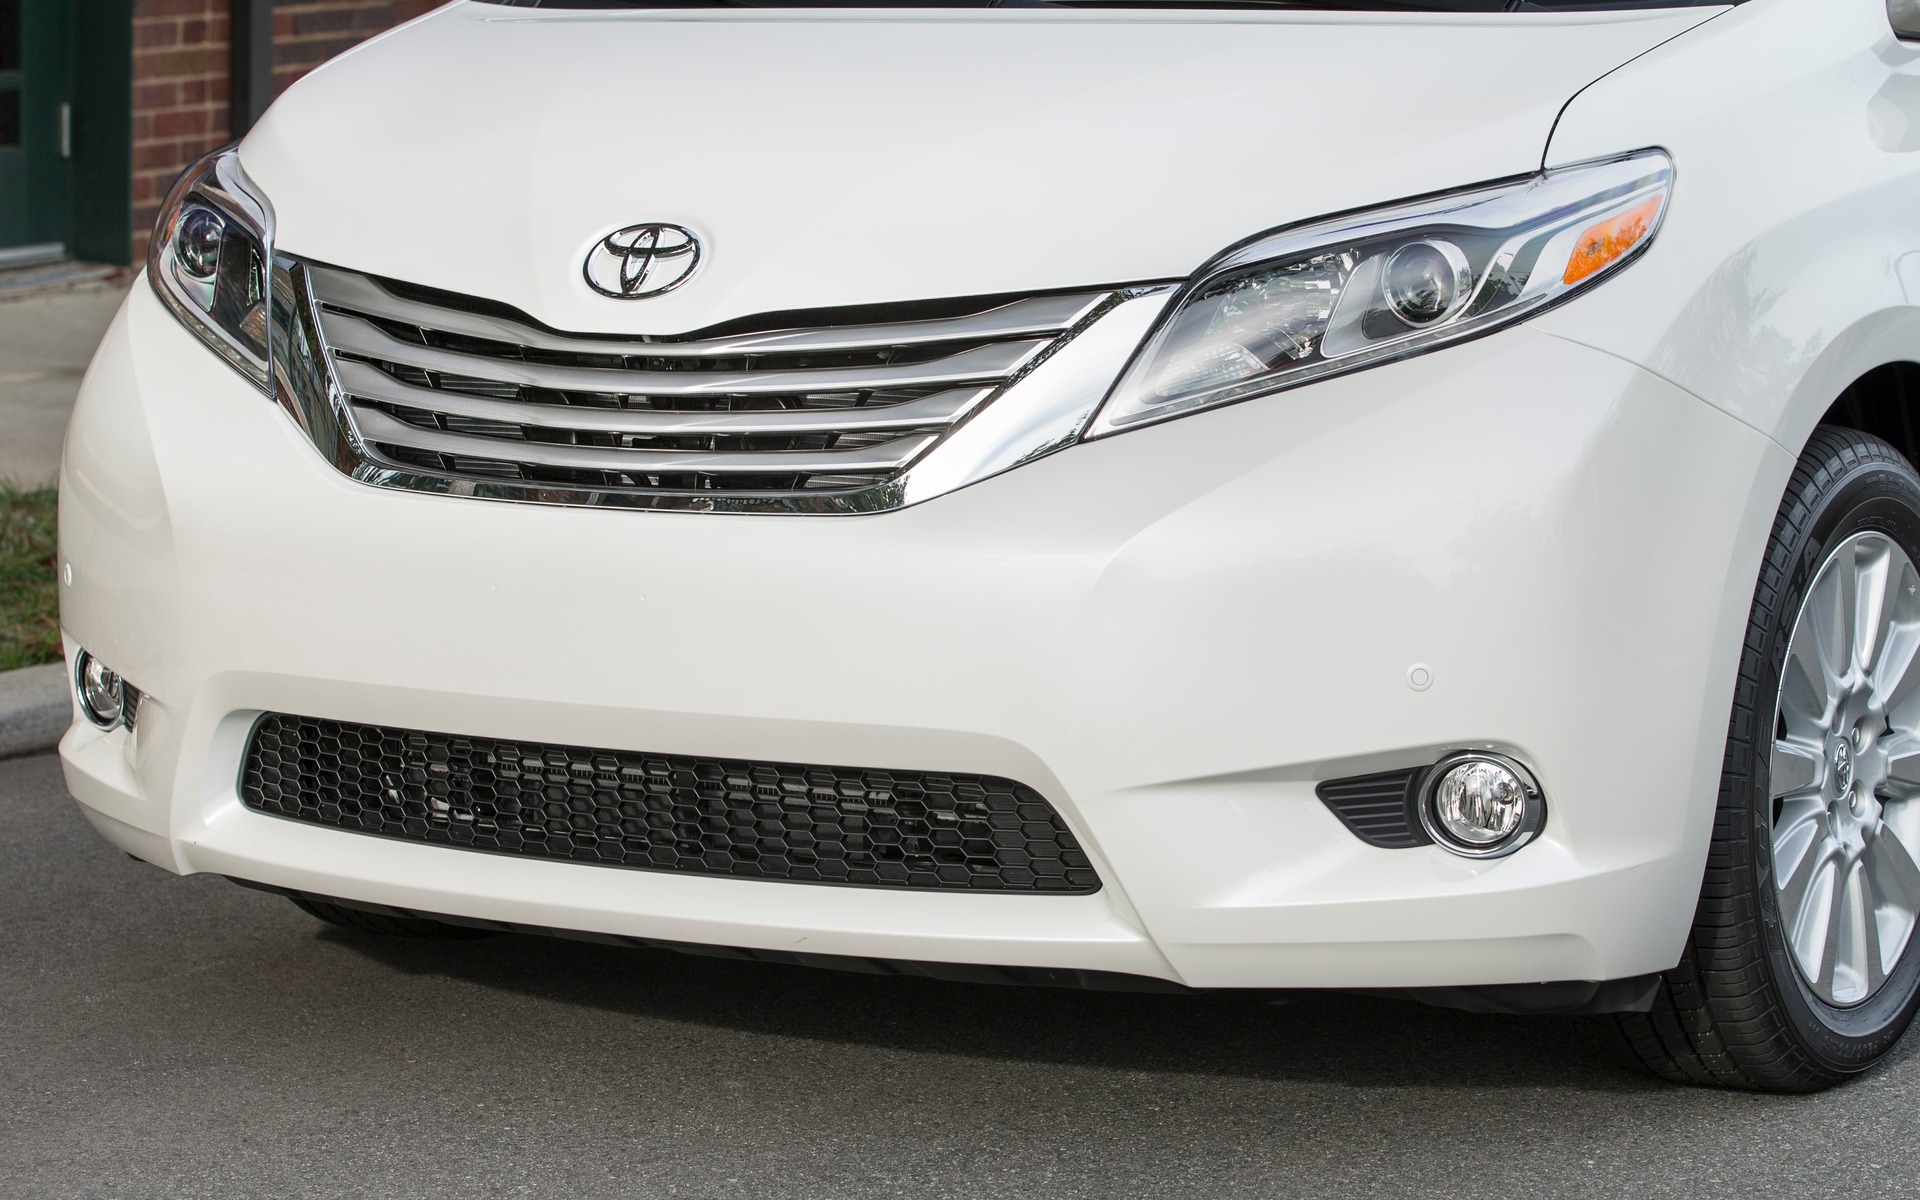 The front grille is the most striking visual aspect.